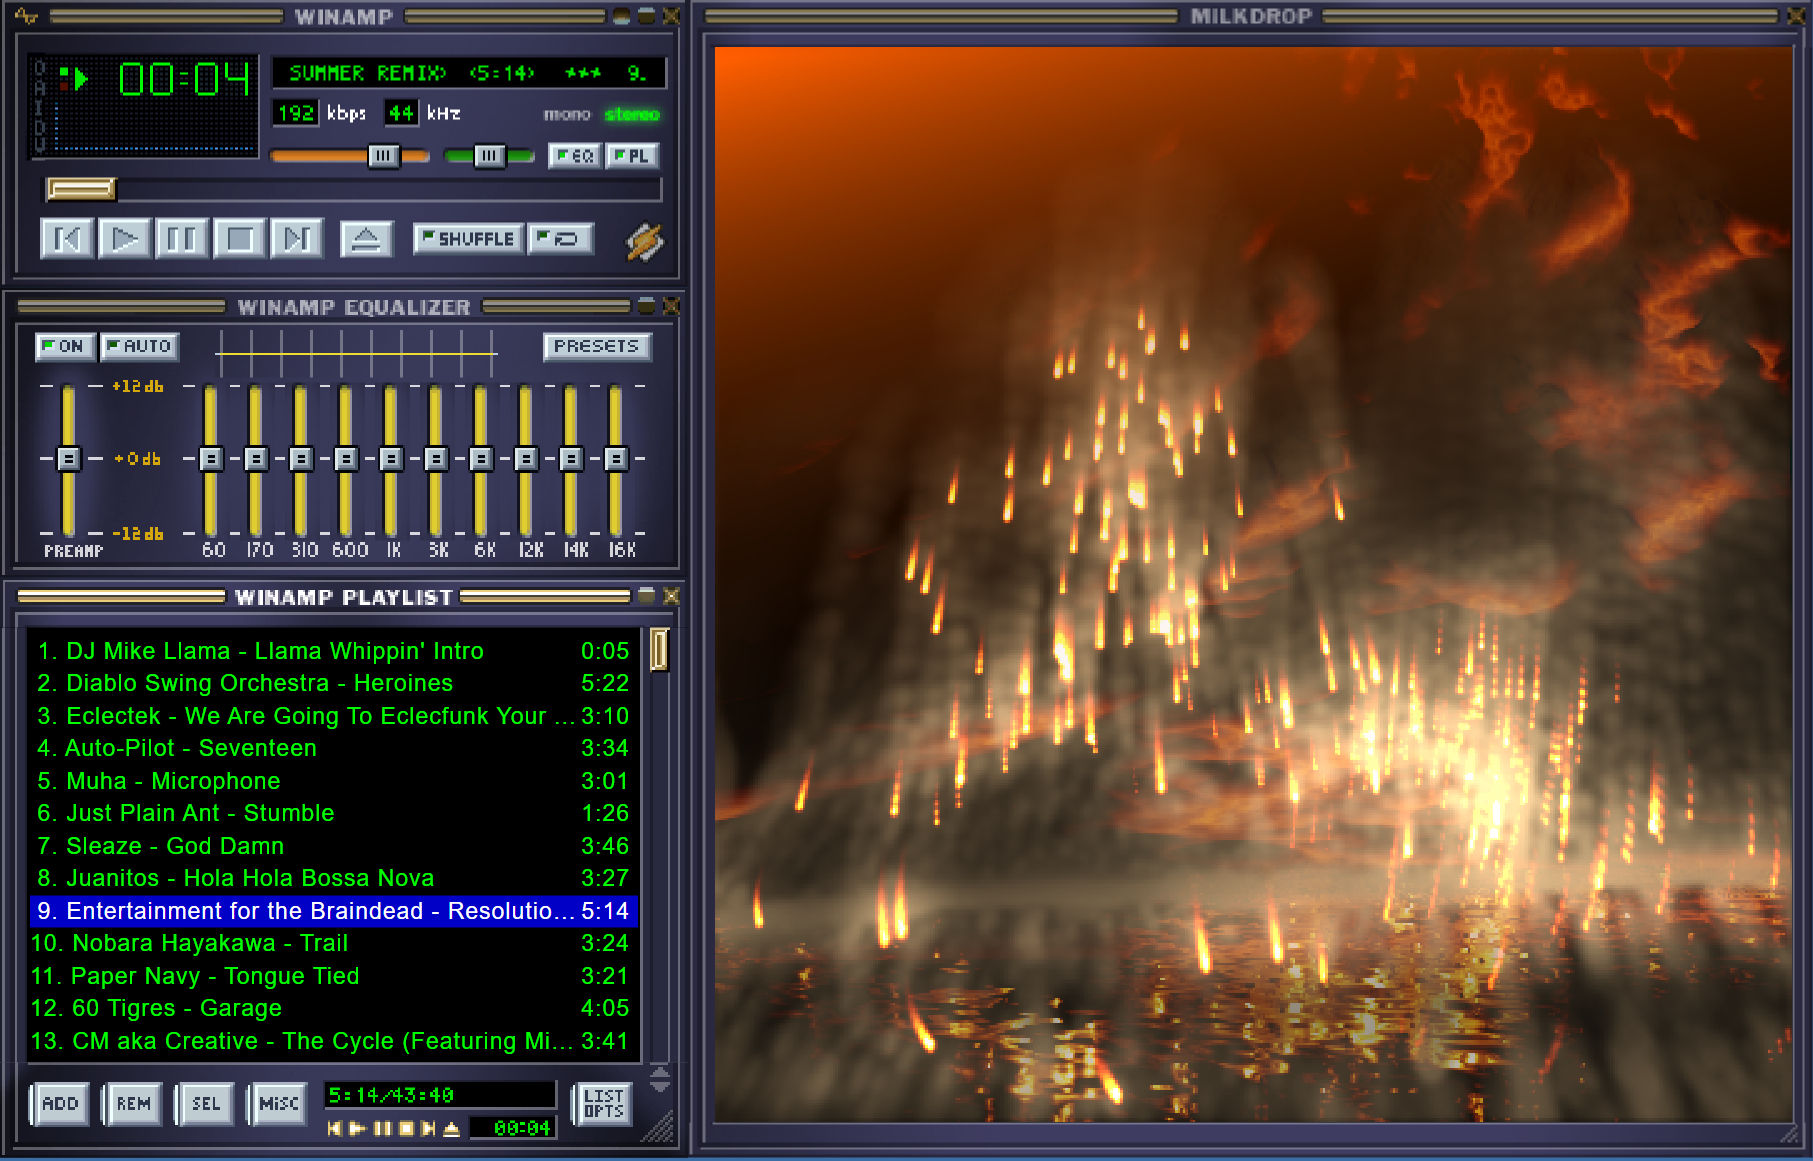 Webamp version of Winamp media player with the Milkdrop visualizer add-on next to it.